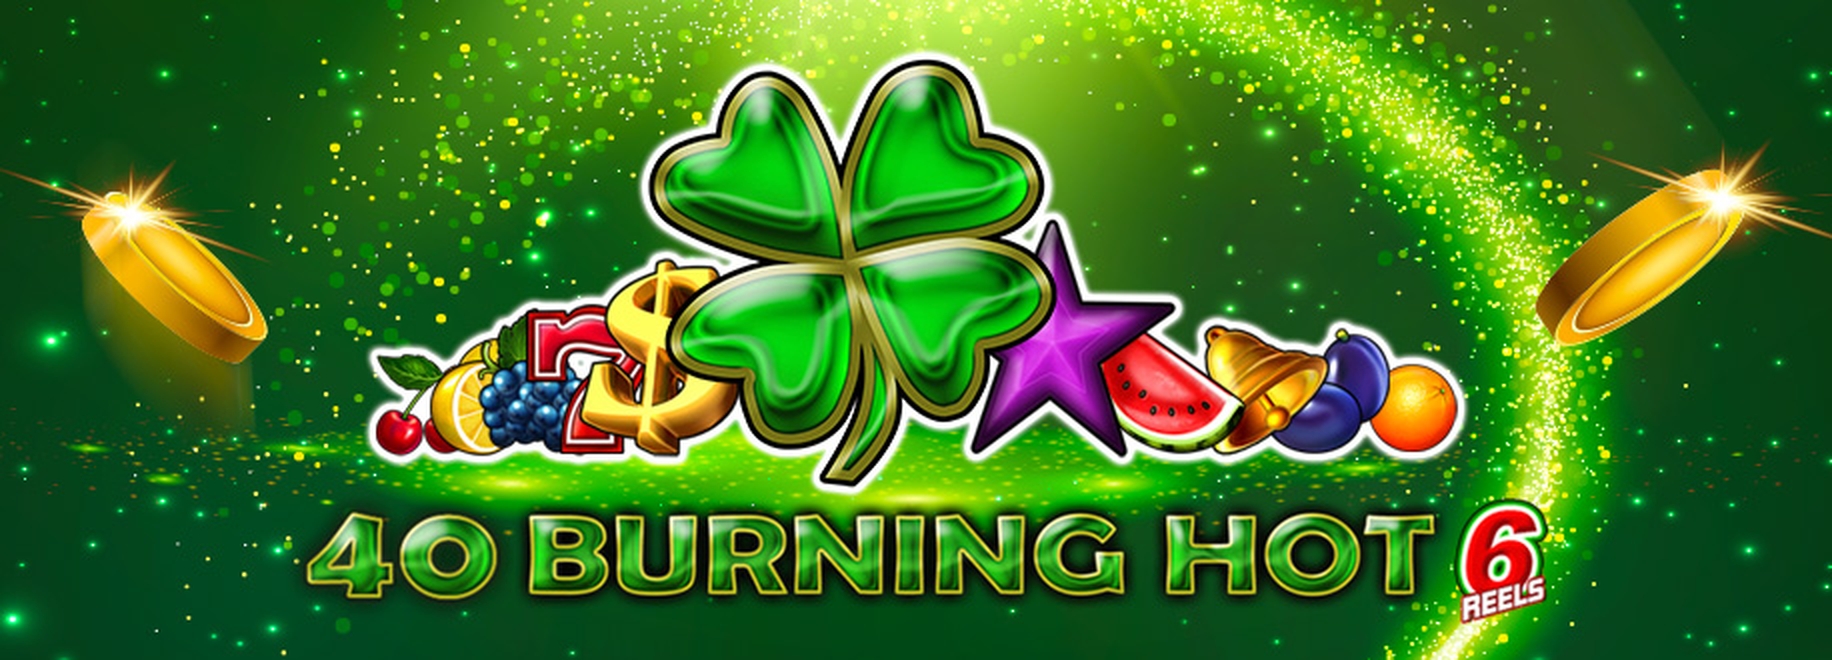 The 40 Burning Hot Online Slot Demo Game by EGT